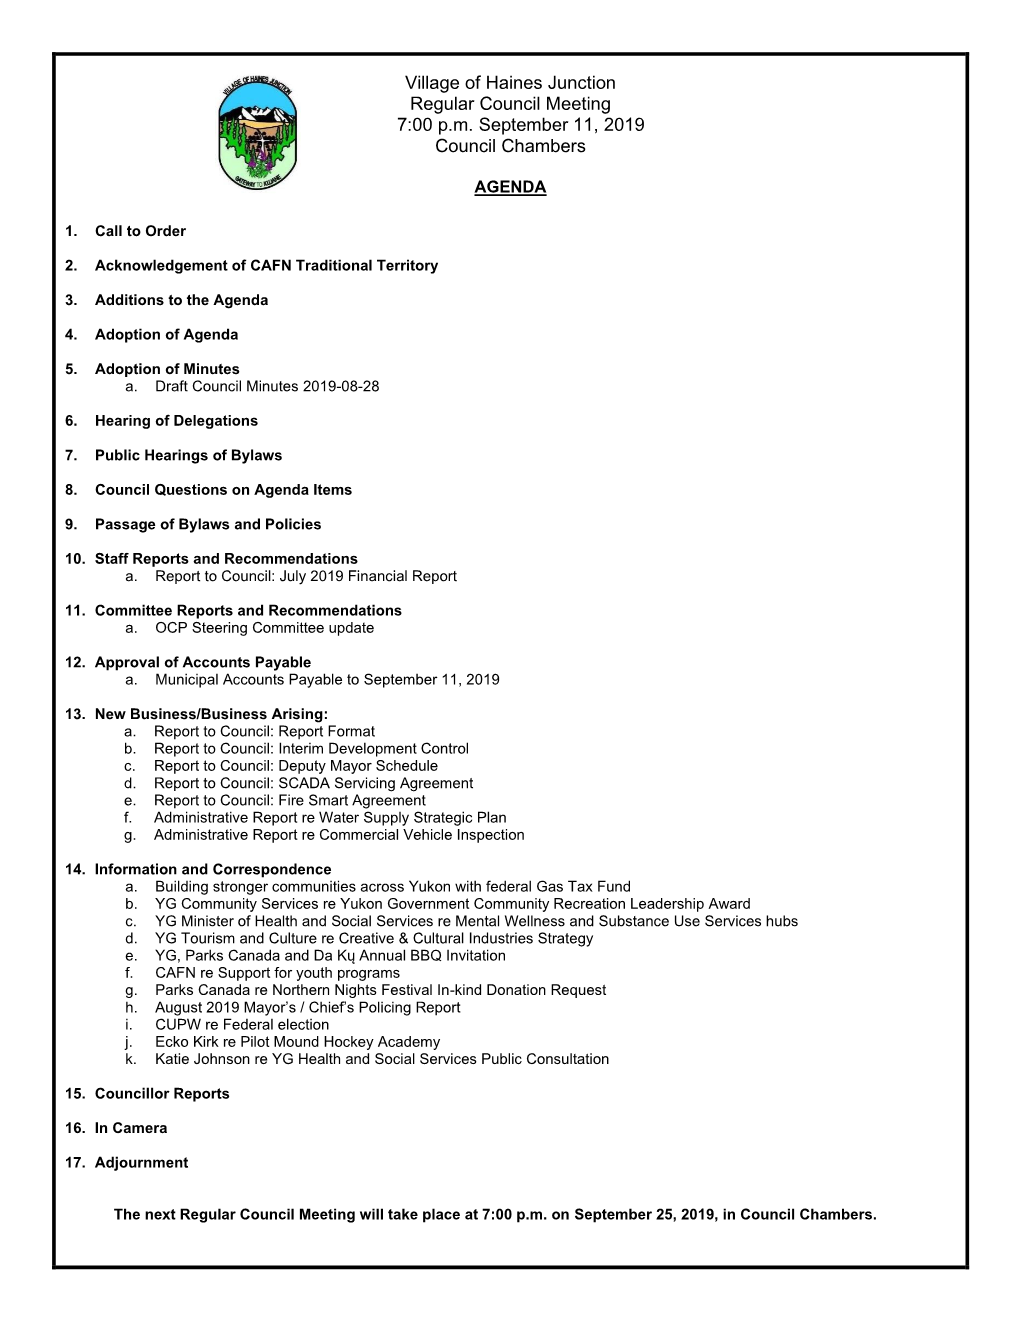 Village of Haines Junction Regular Council Meeting 7:00 P.M. September 11, 2019 Council Chambers